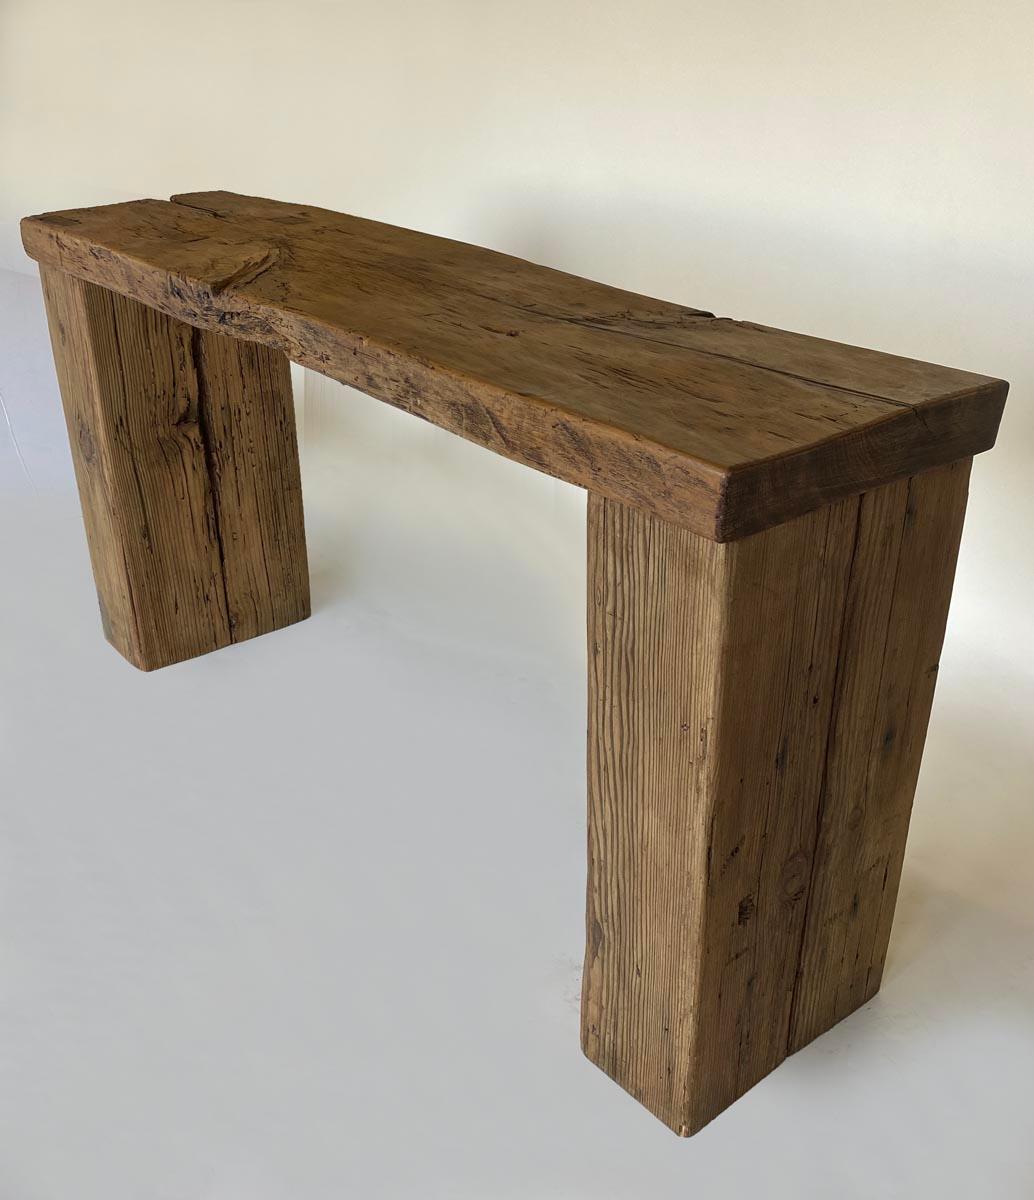 Rustic waterfall style console consisting of a 19th century one wide board of cipres wood atop reclaimed you fir beams. Weathered rustic finish but top is still very smooth to the touch.